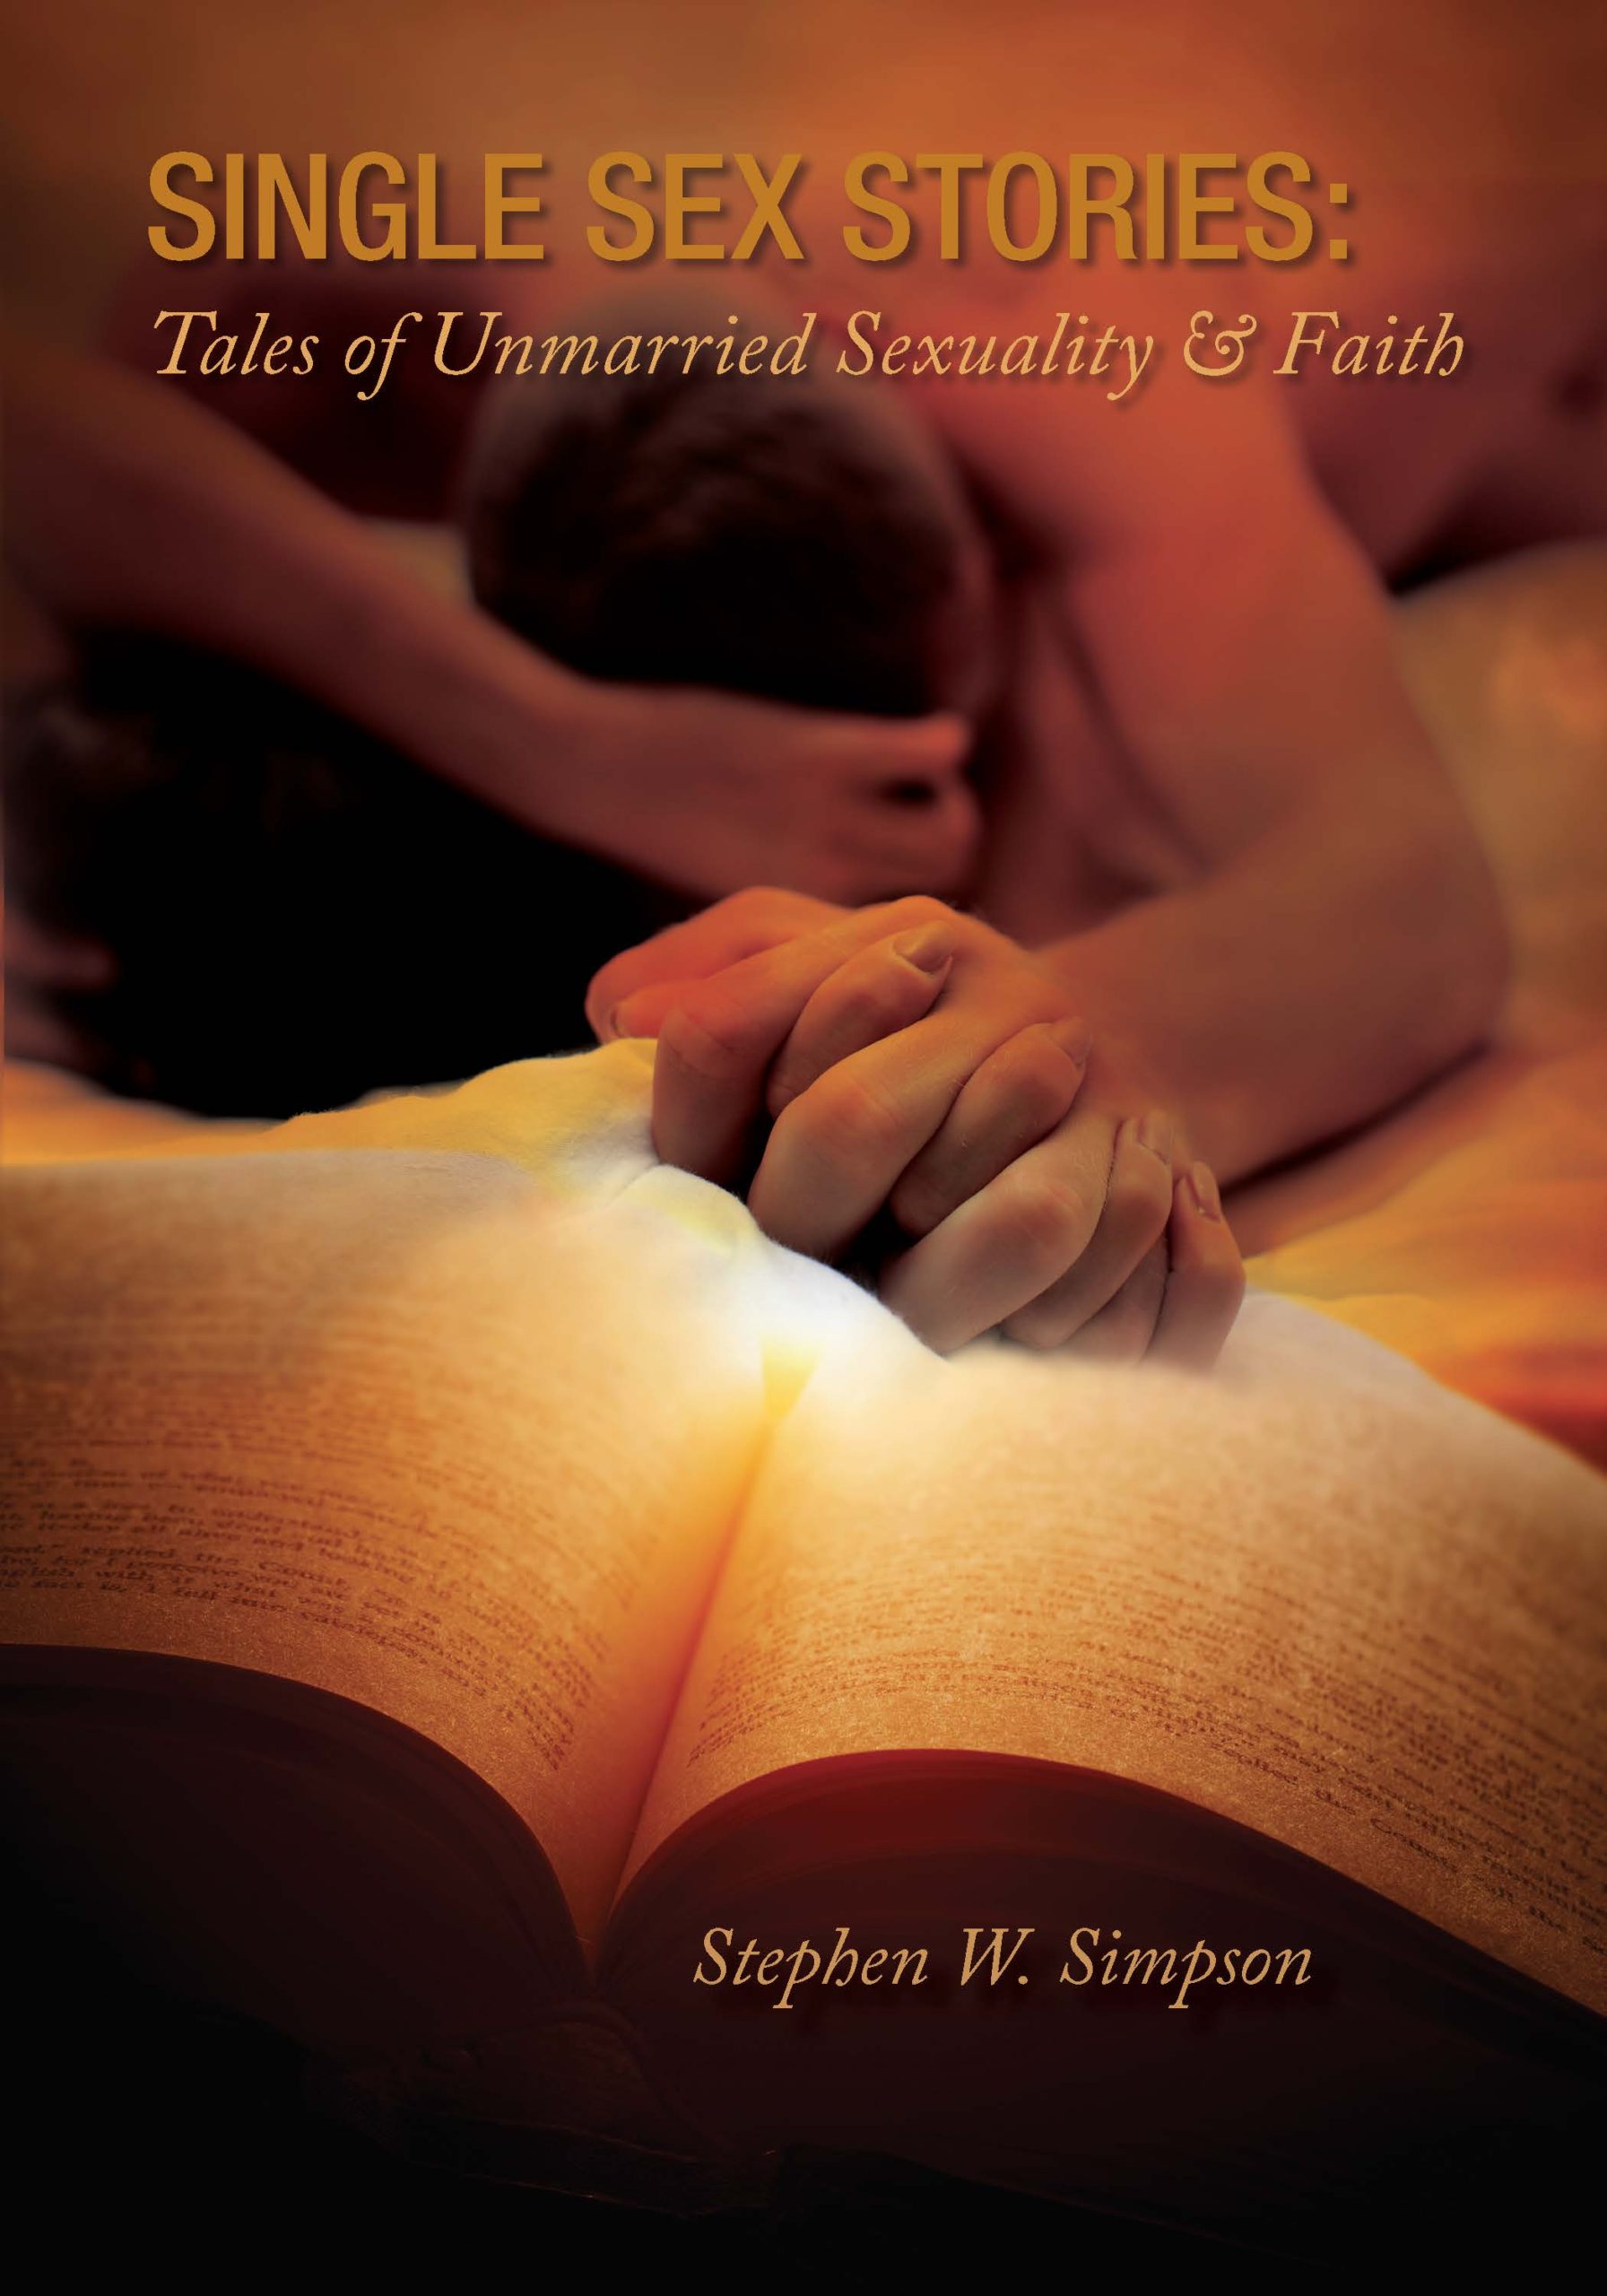 Single Sex Stories Tales of Unmarried Sexuality and Faith